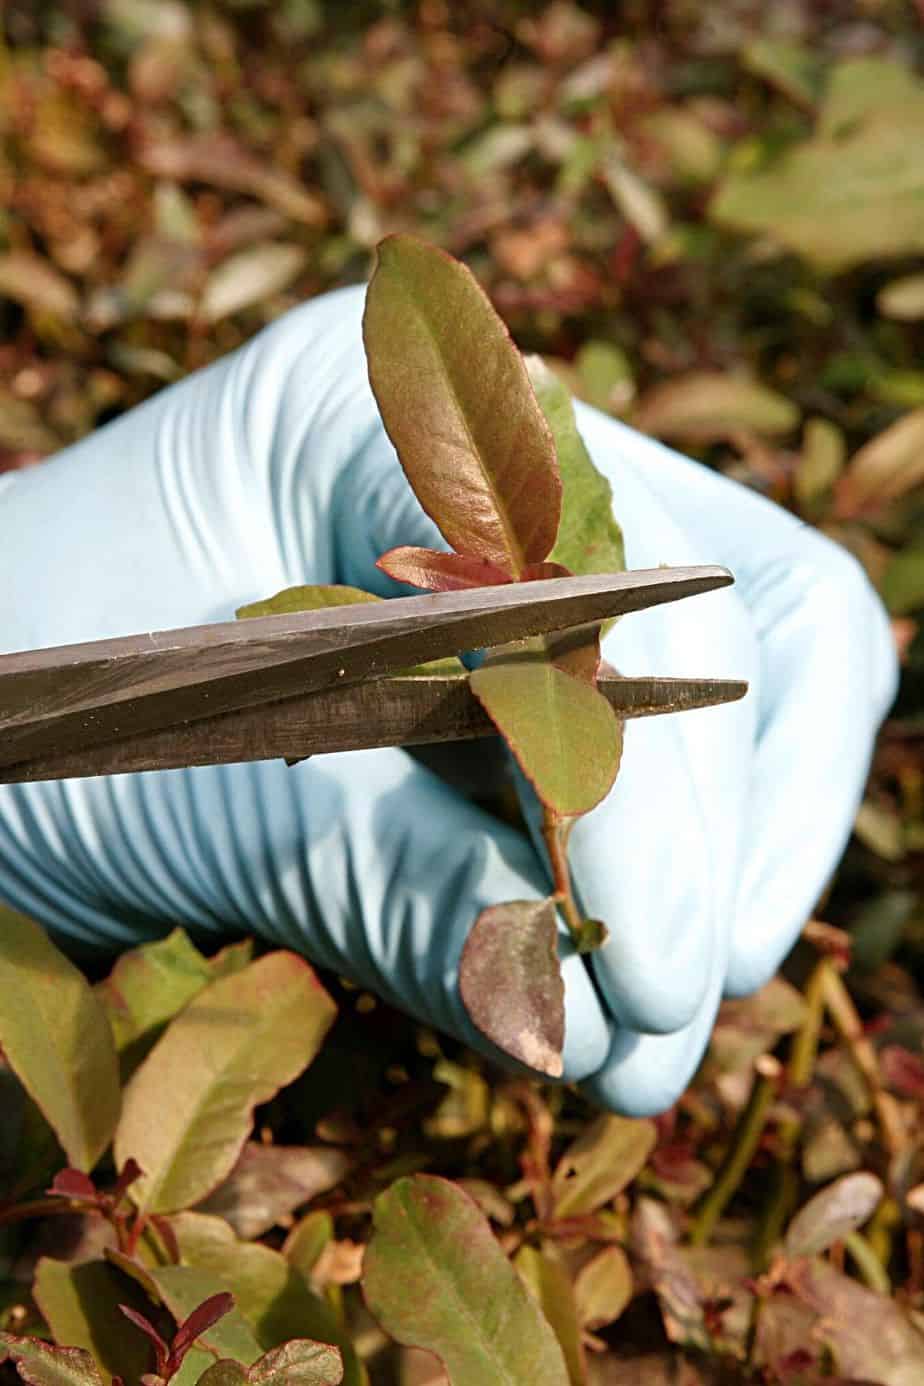 With a clean knife or secateurs, cut a 4-inch mature shoot from the mother eucalyptus plant to propagate it from cutting